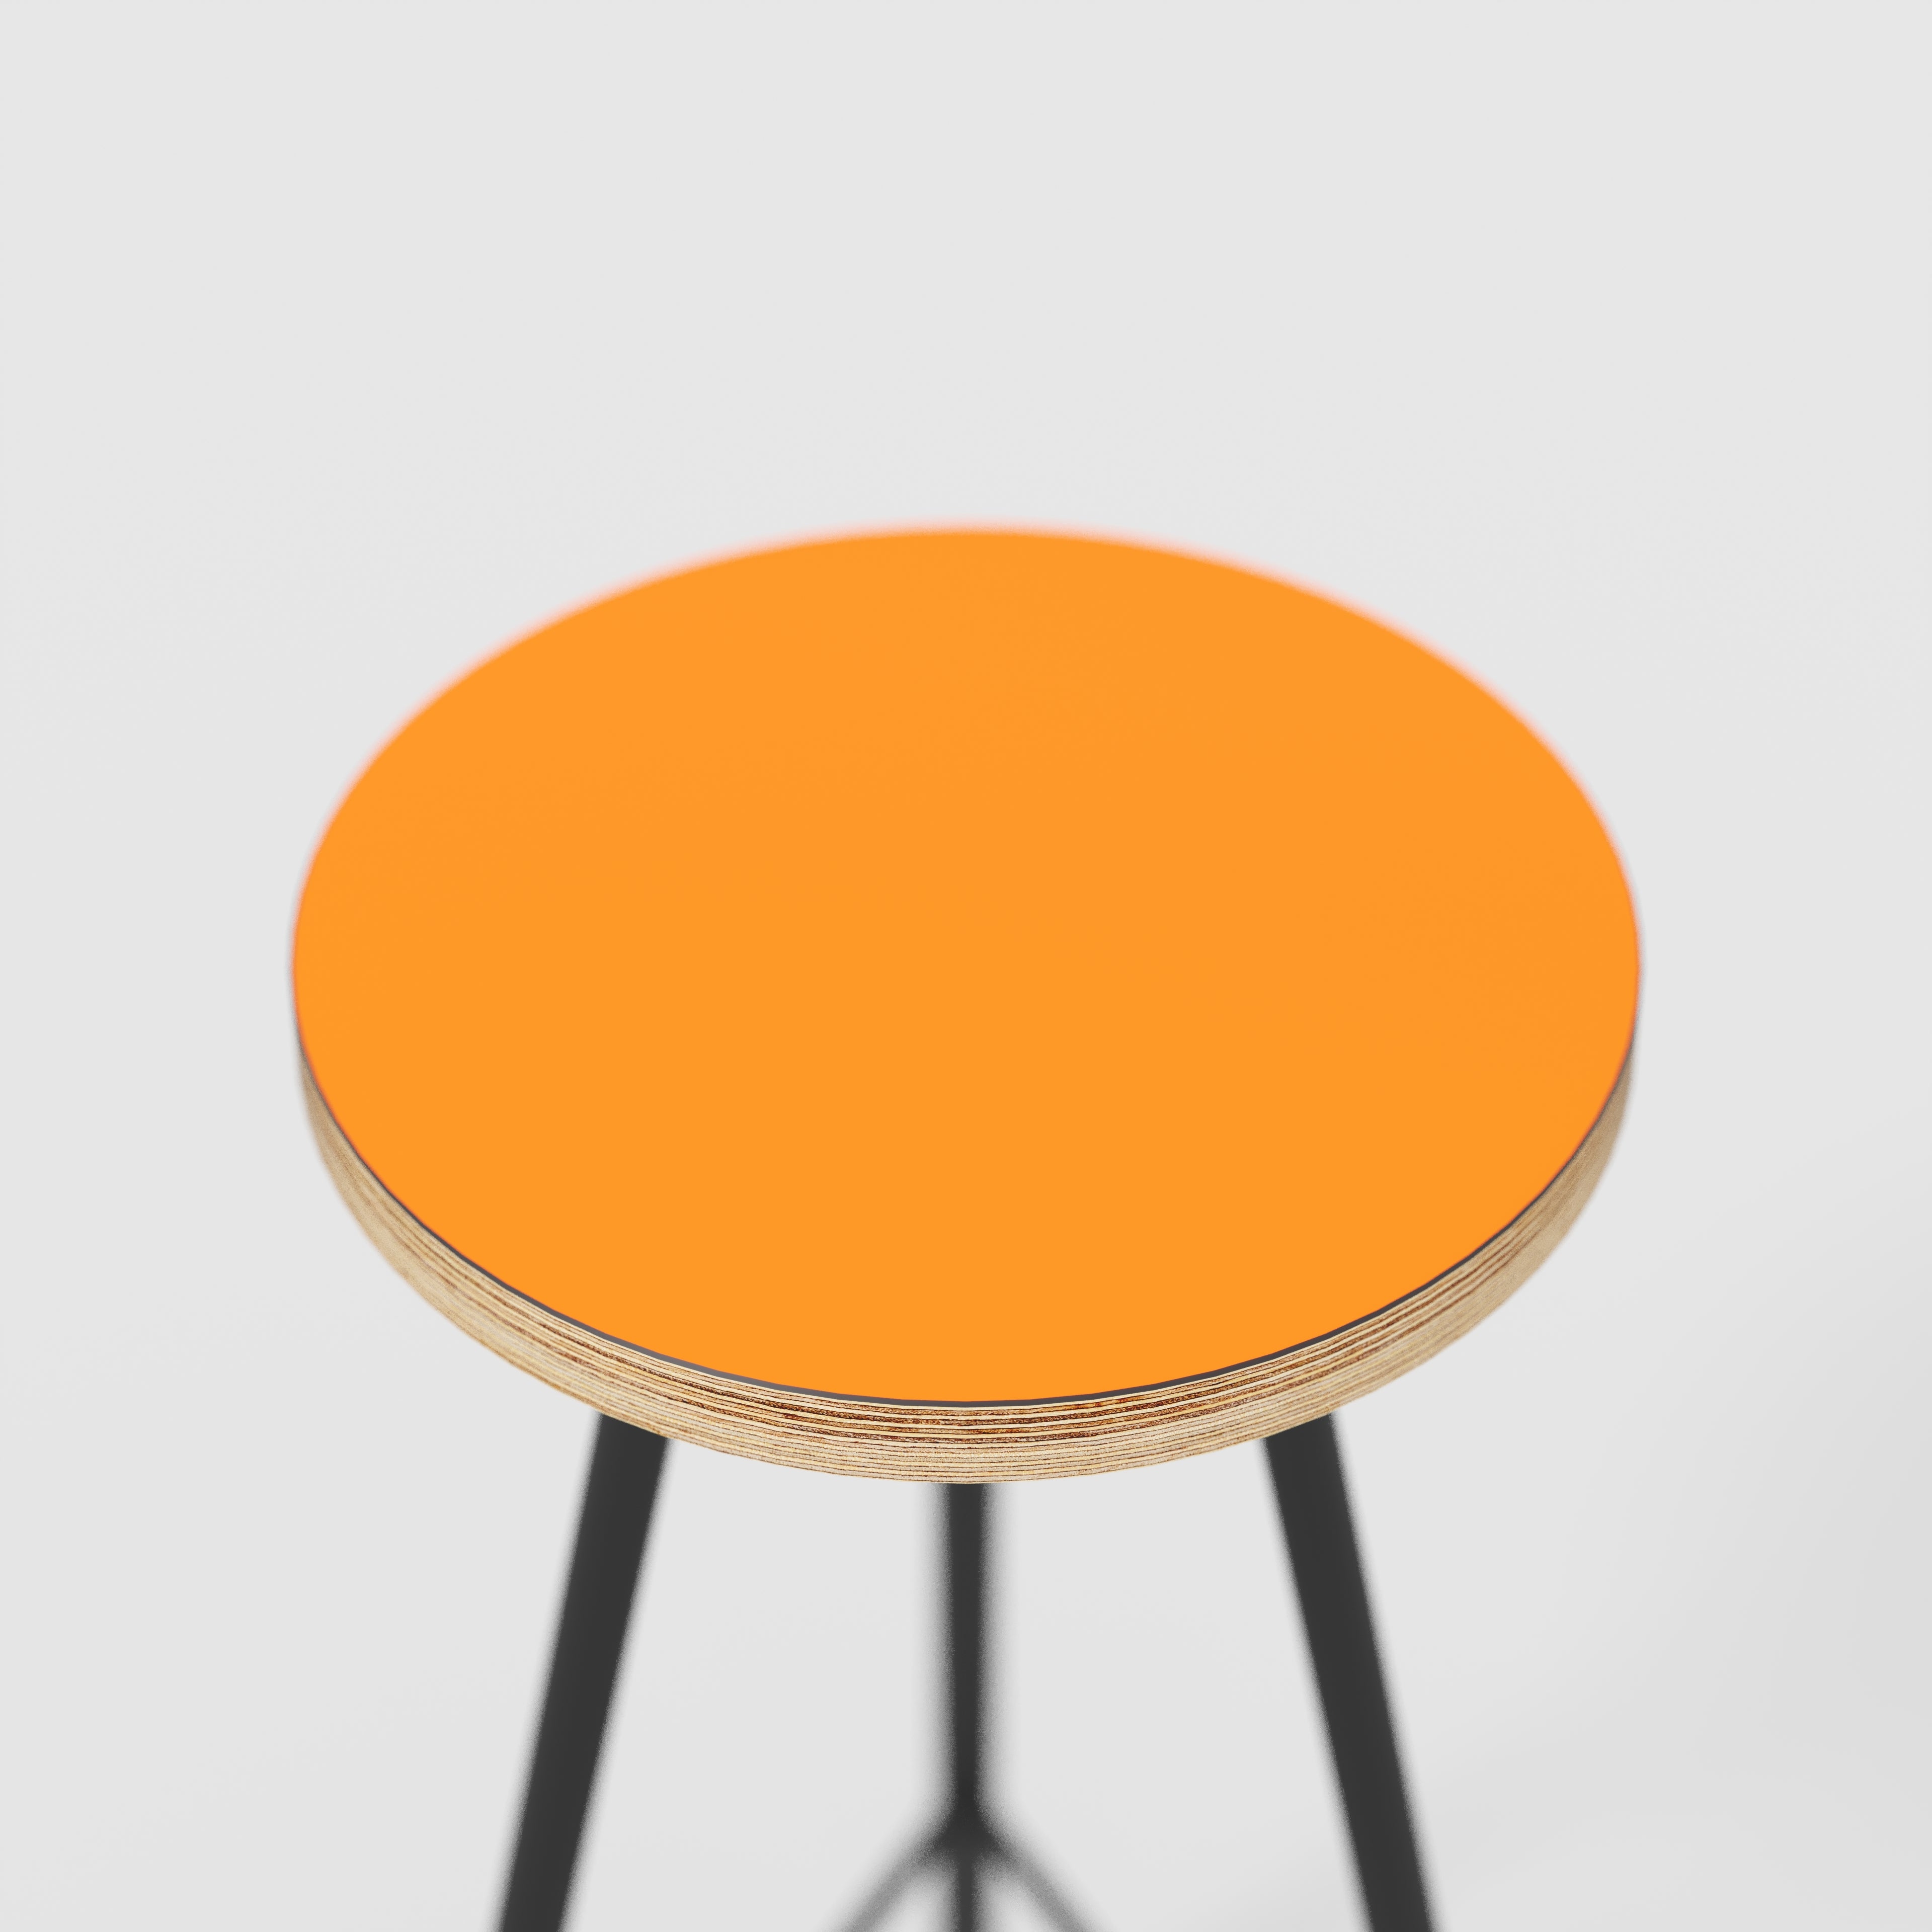 Bar Stool with Black Nord Base - Formica Levante Orange